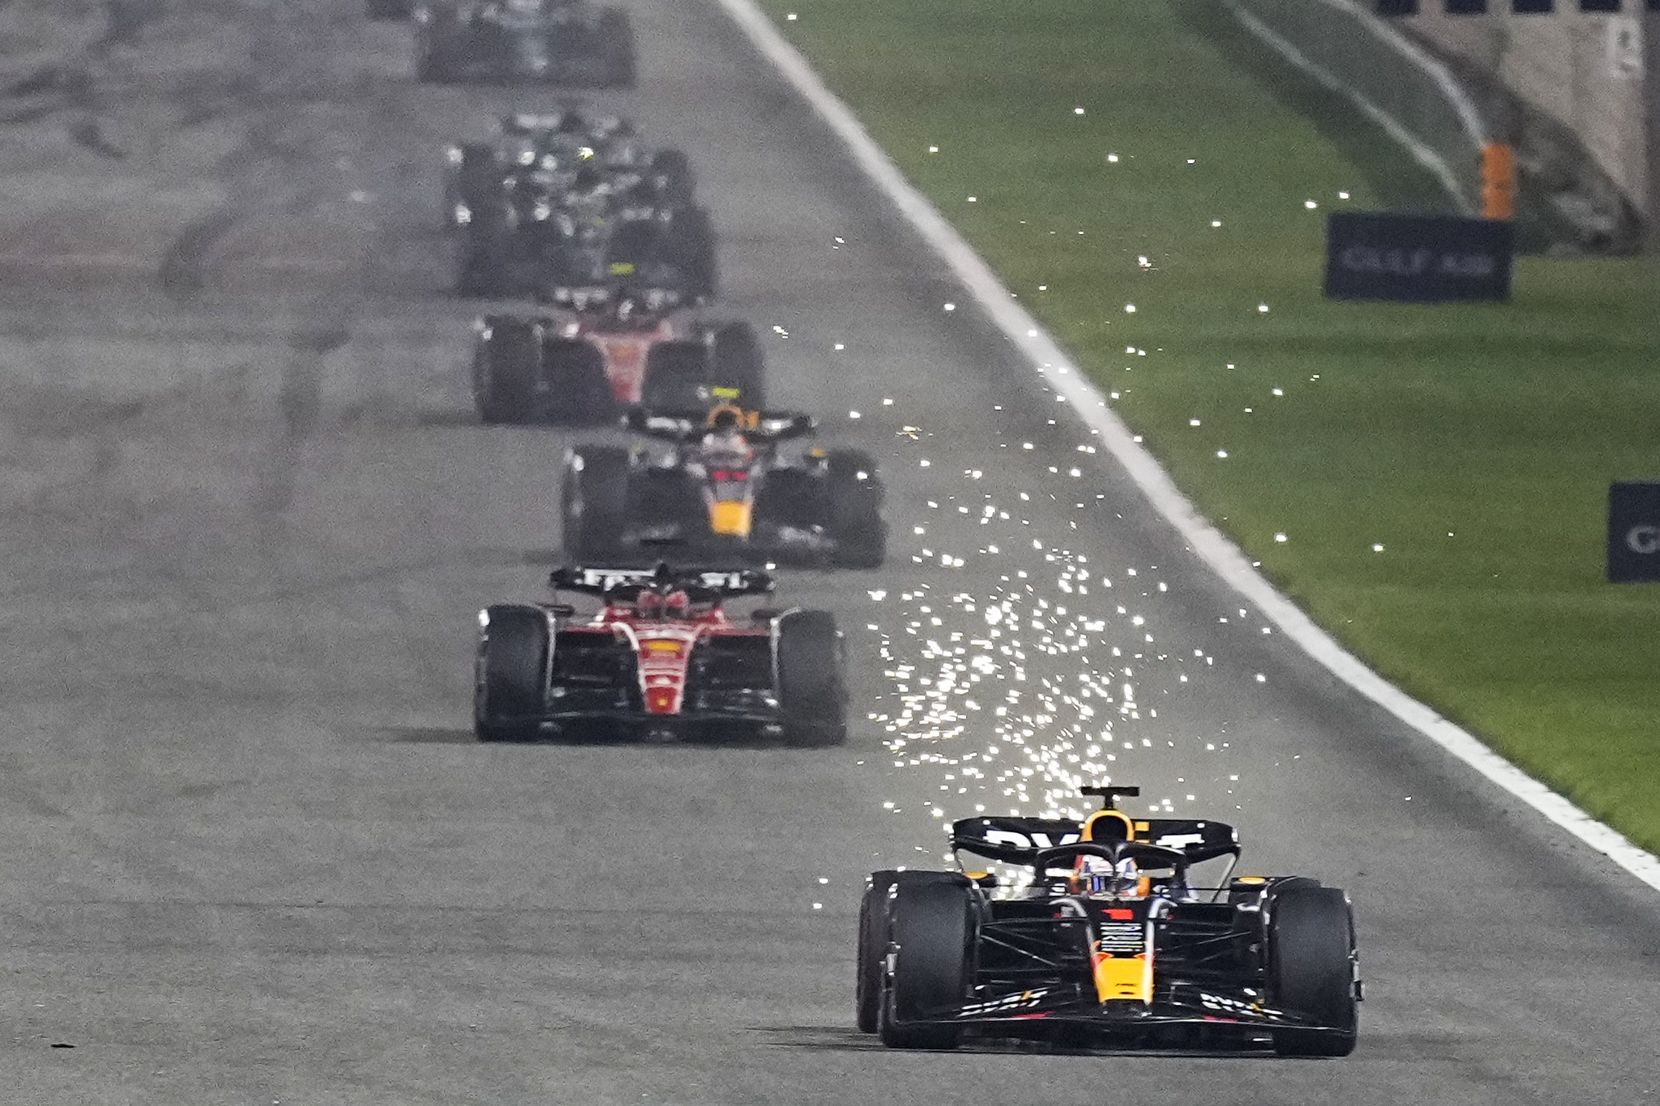 Red Bull driver Max Verstappen of the Netherlands leads at the start of the Formula One Bahrain Grand Prix at Sakhir circuit, Sunday, March 5, 2023. (AP Photo/Ariel Schalit)